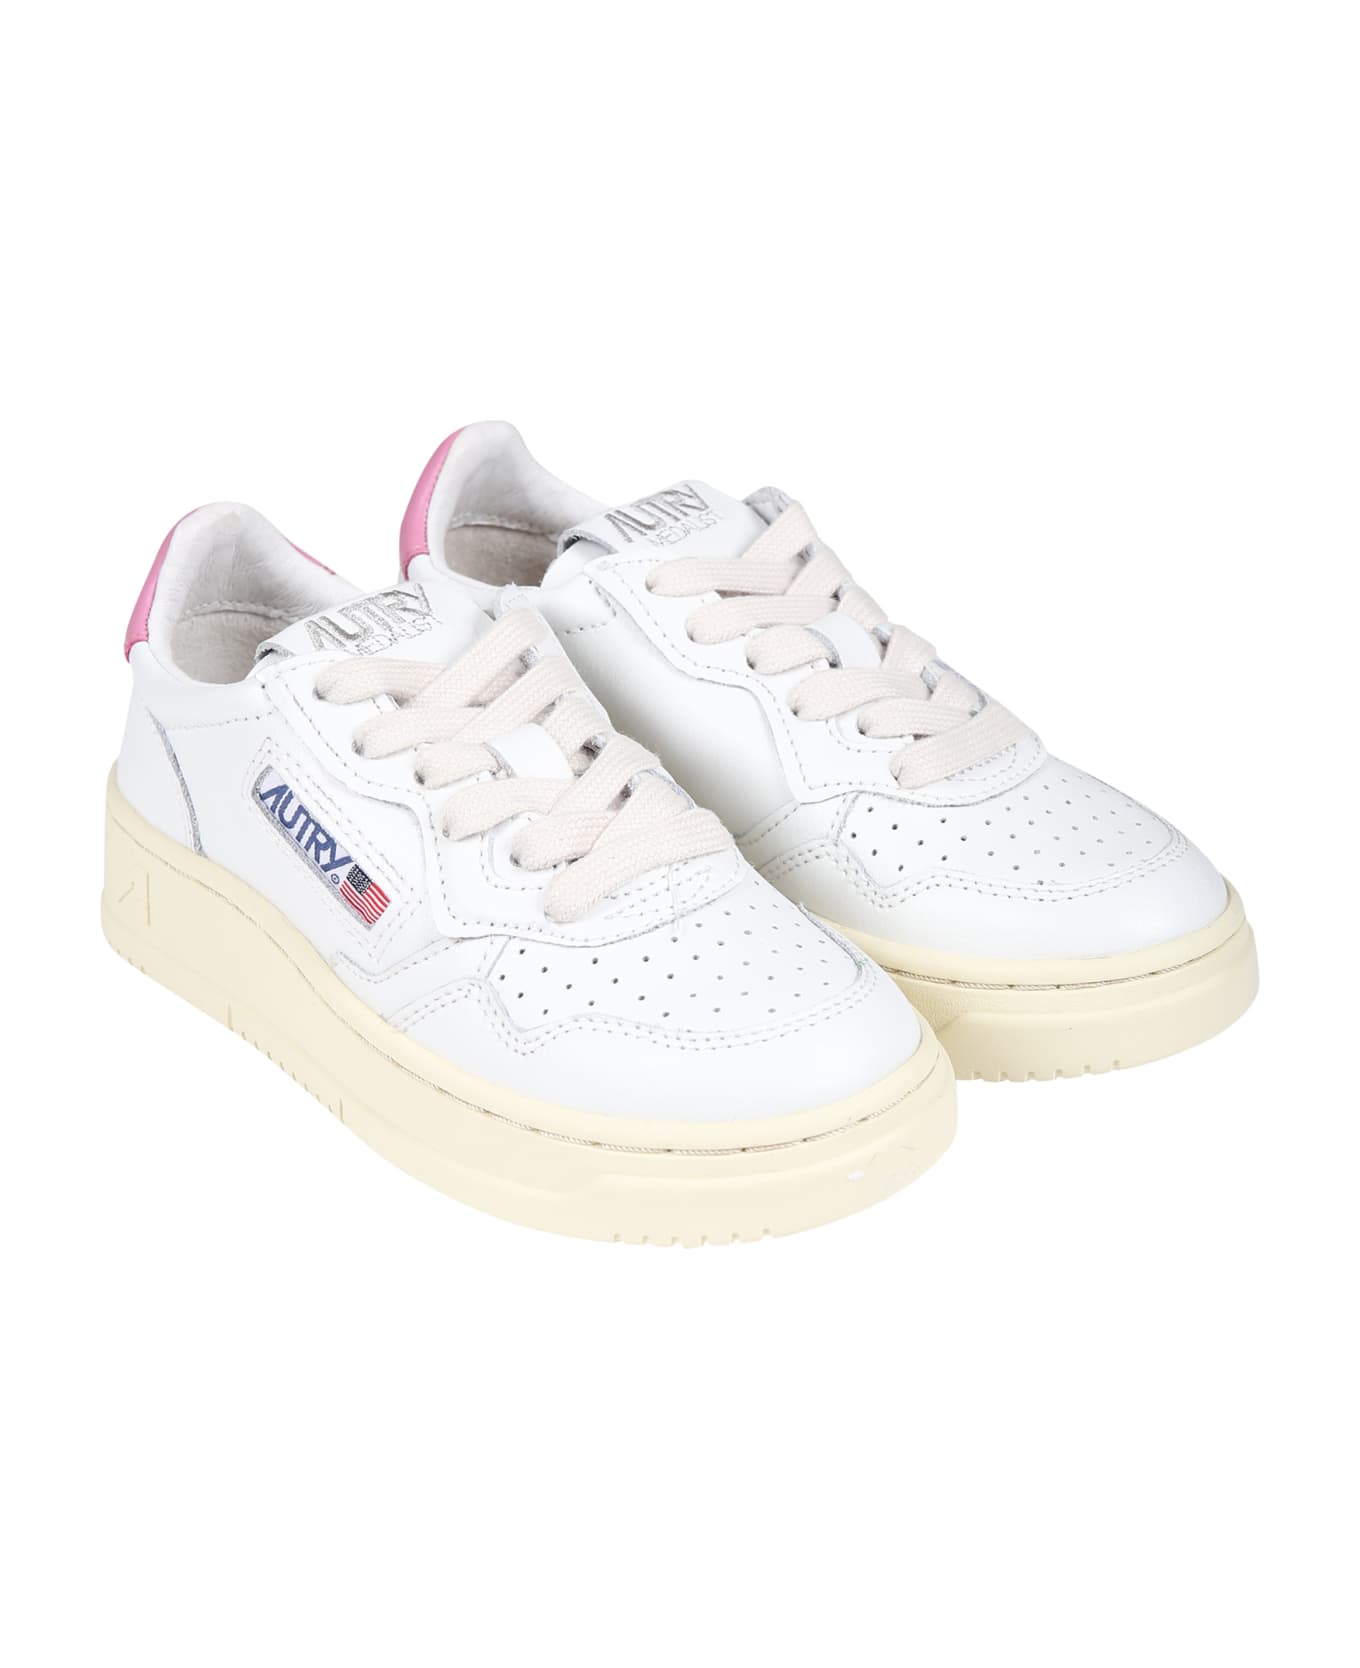 Autry White Sneakers For Girl With Logo - White